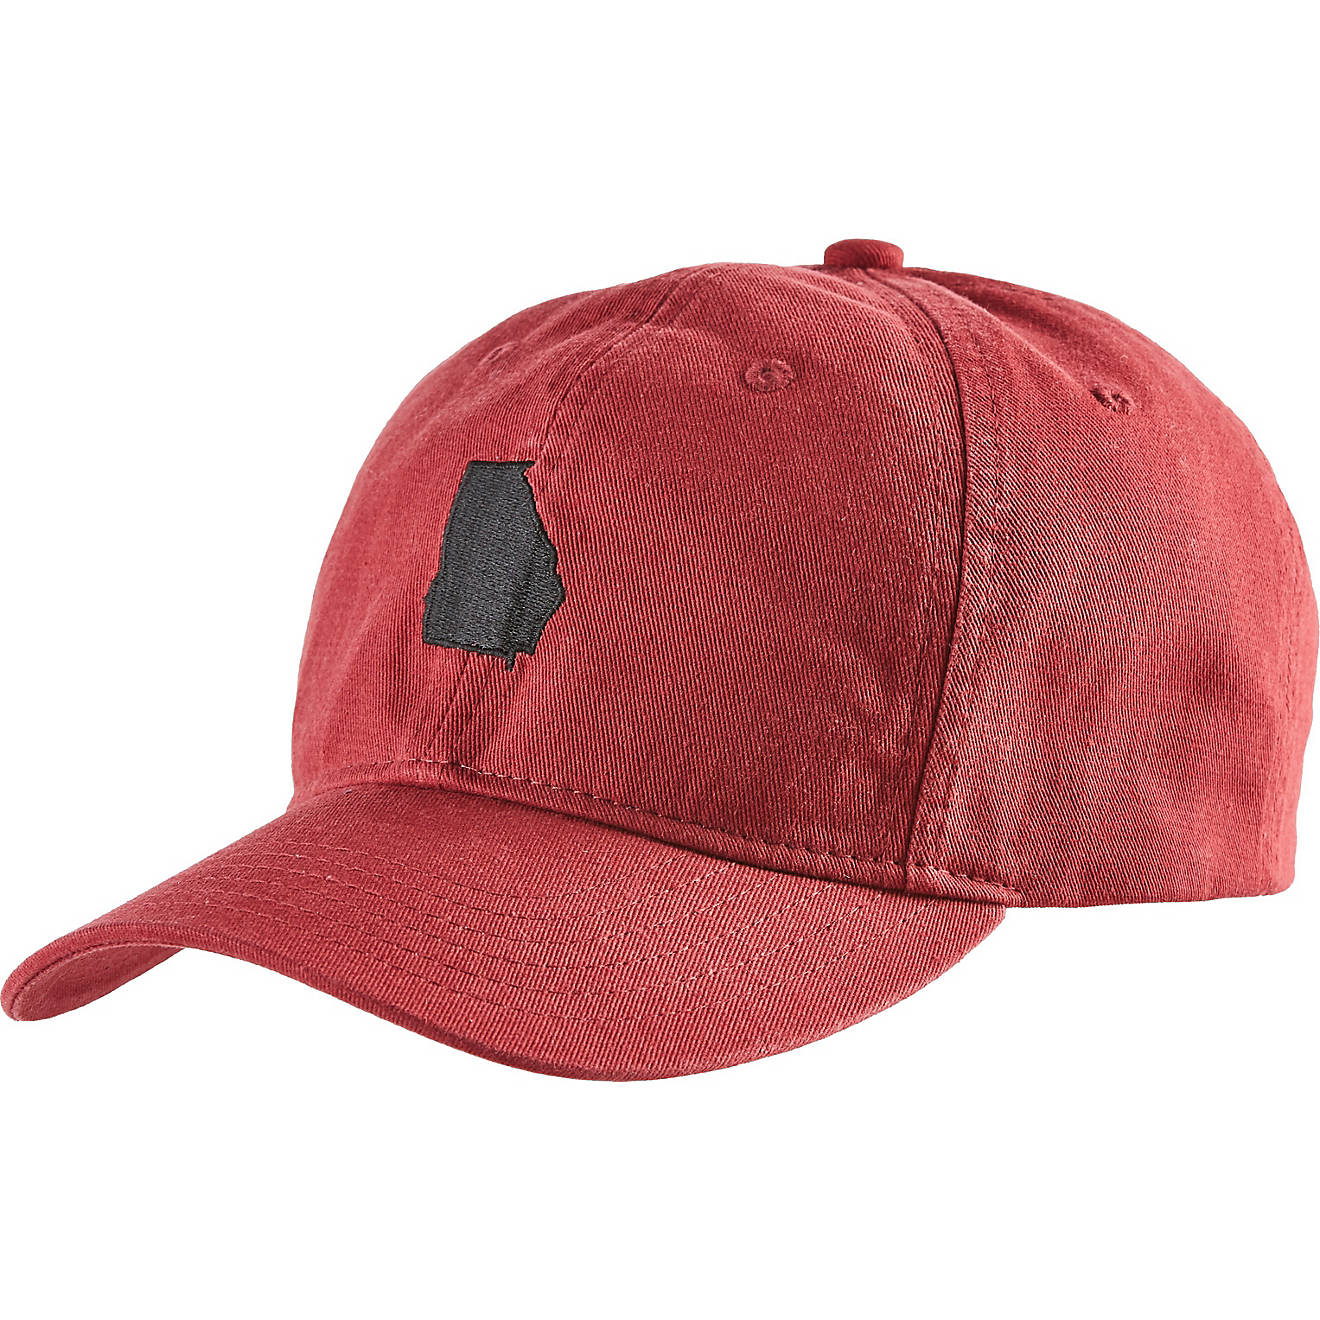 Academy Sports + Outdoors Men's Georgia State Outline Cap                                                                        - view number 1